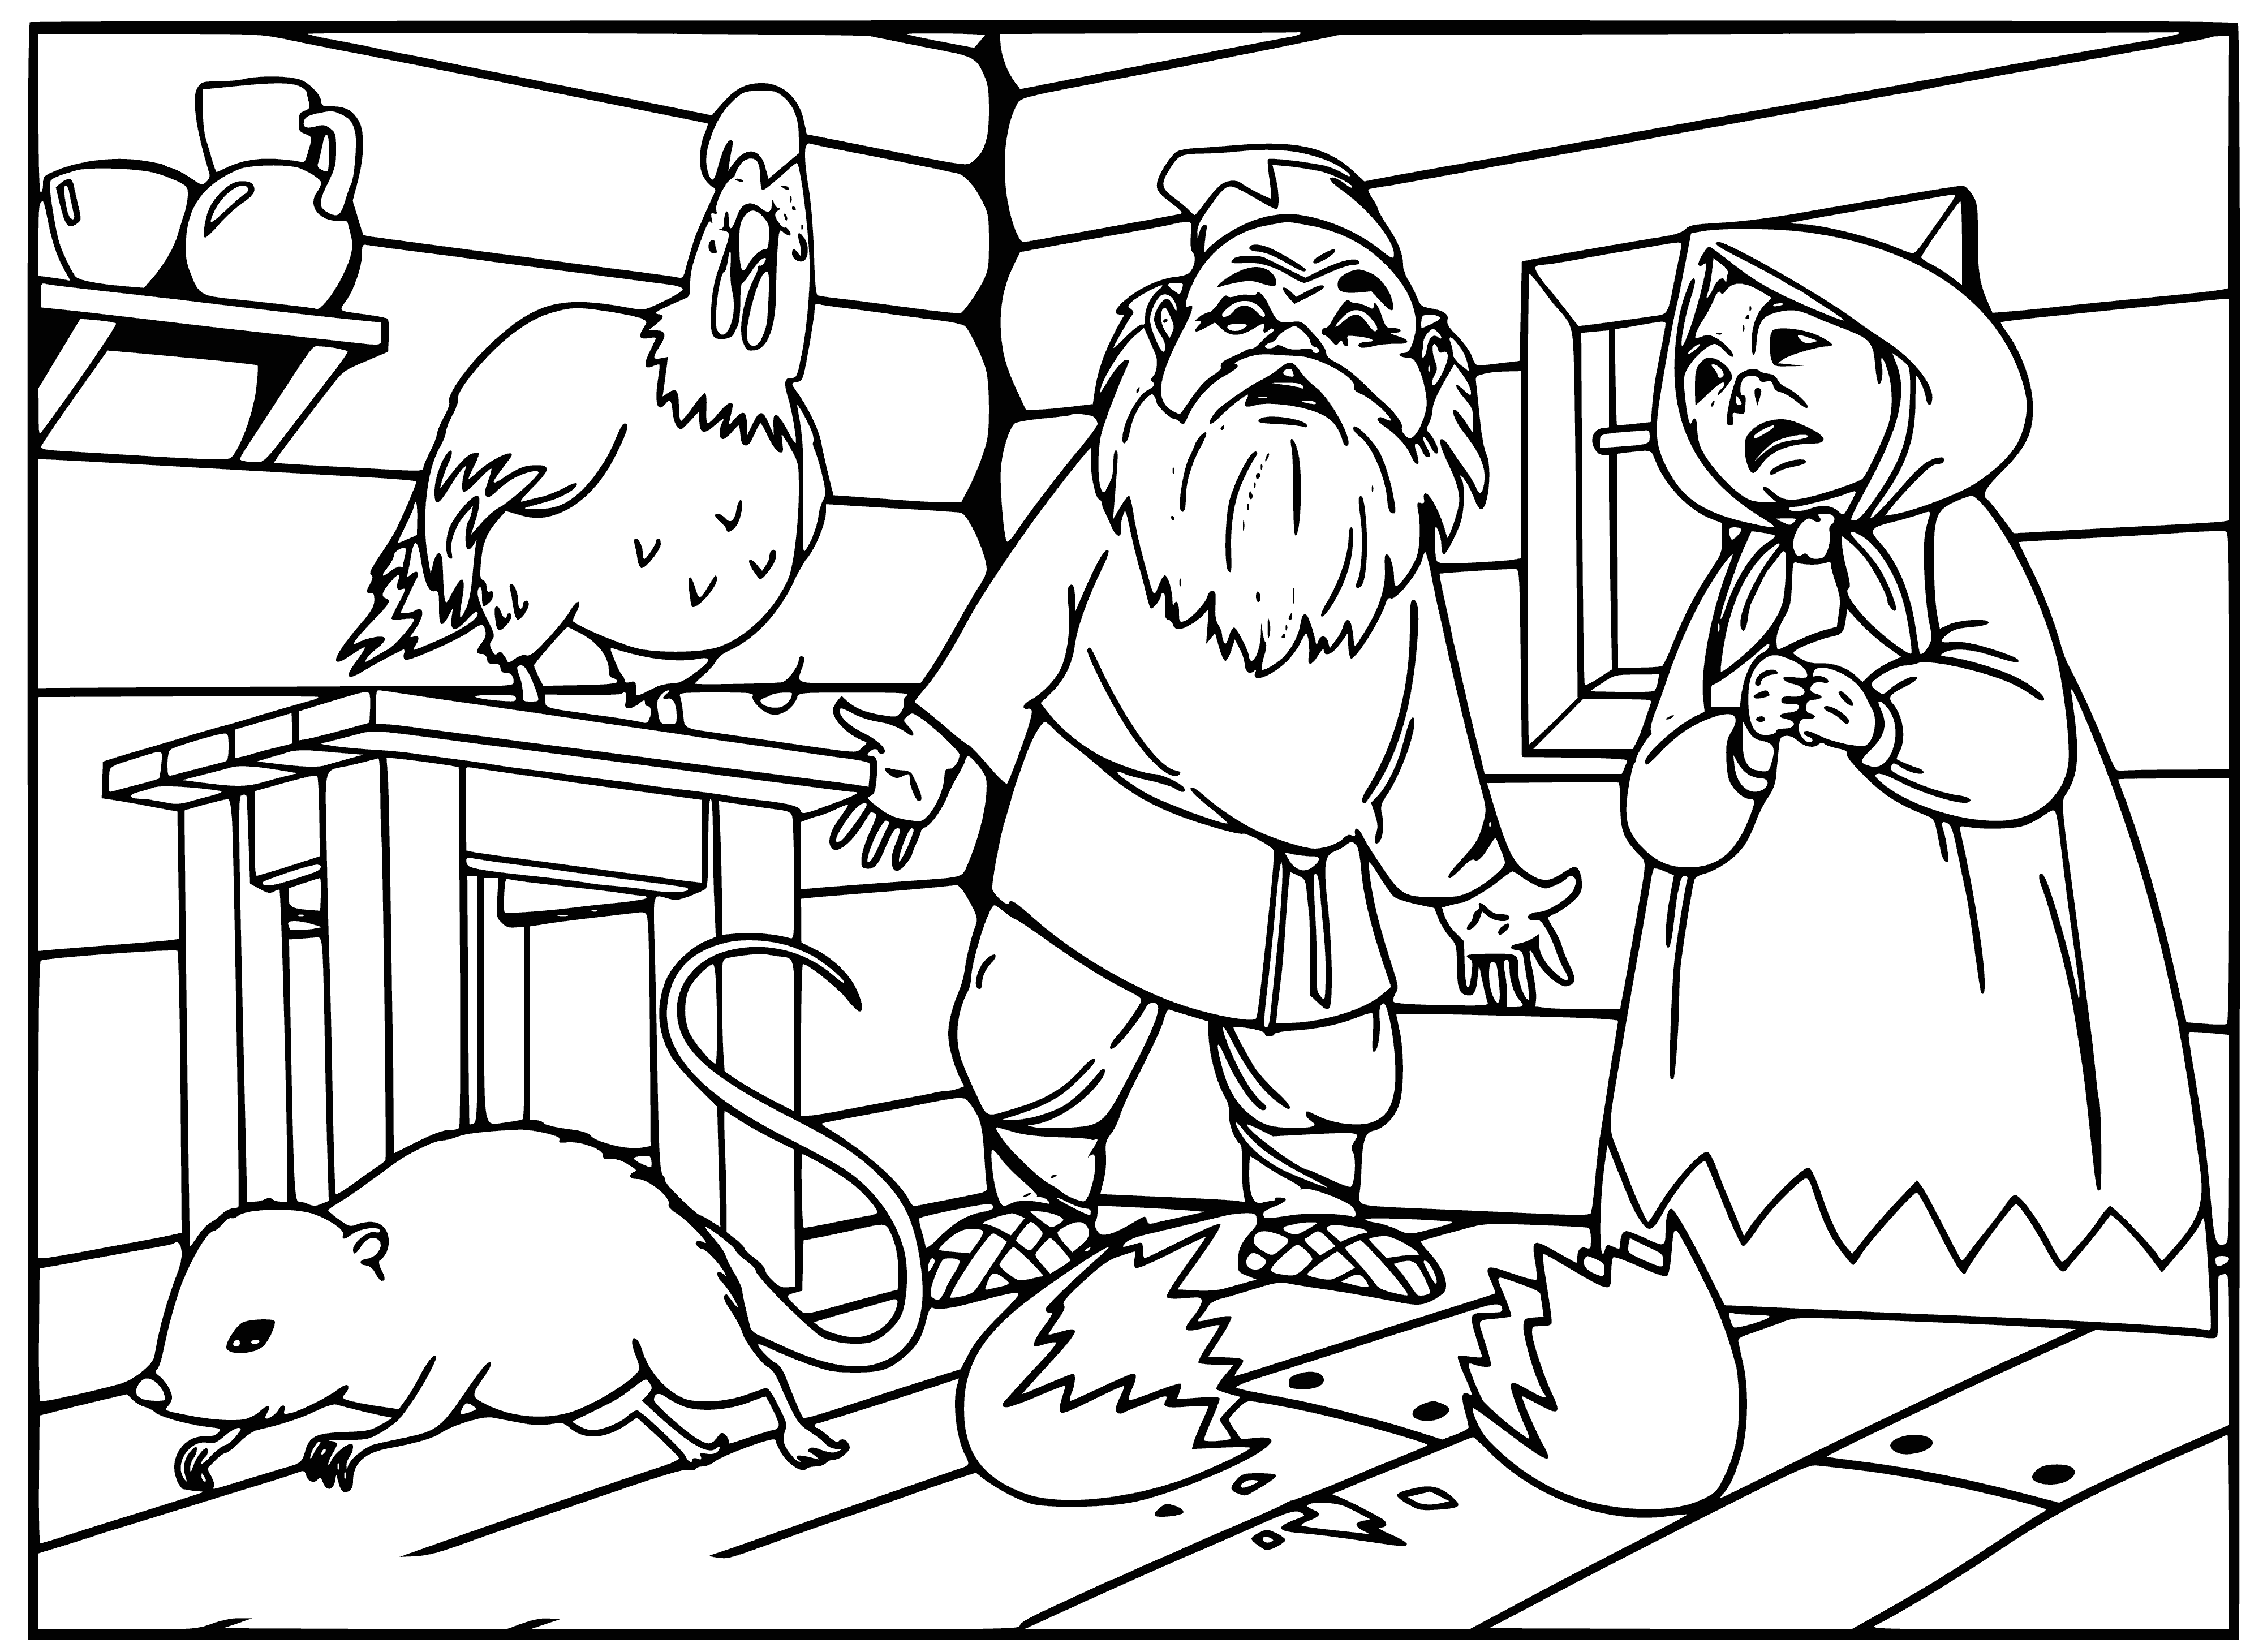 coloring page: Man's testicles have fallen out and shattered, leaving a bloody mess on the ground.